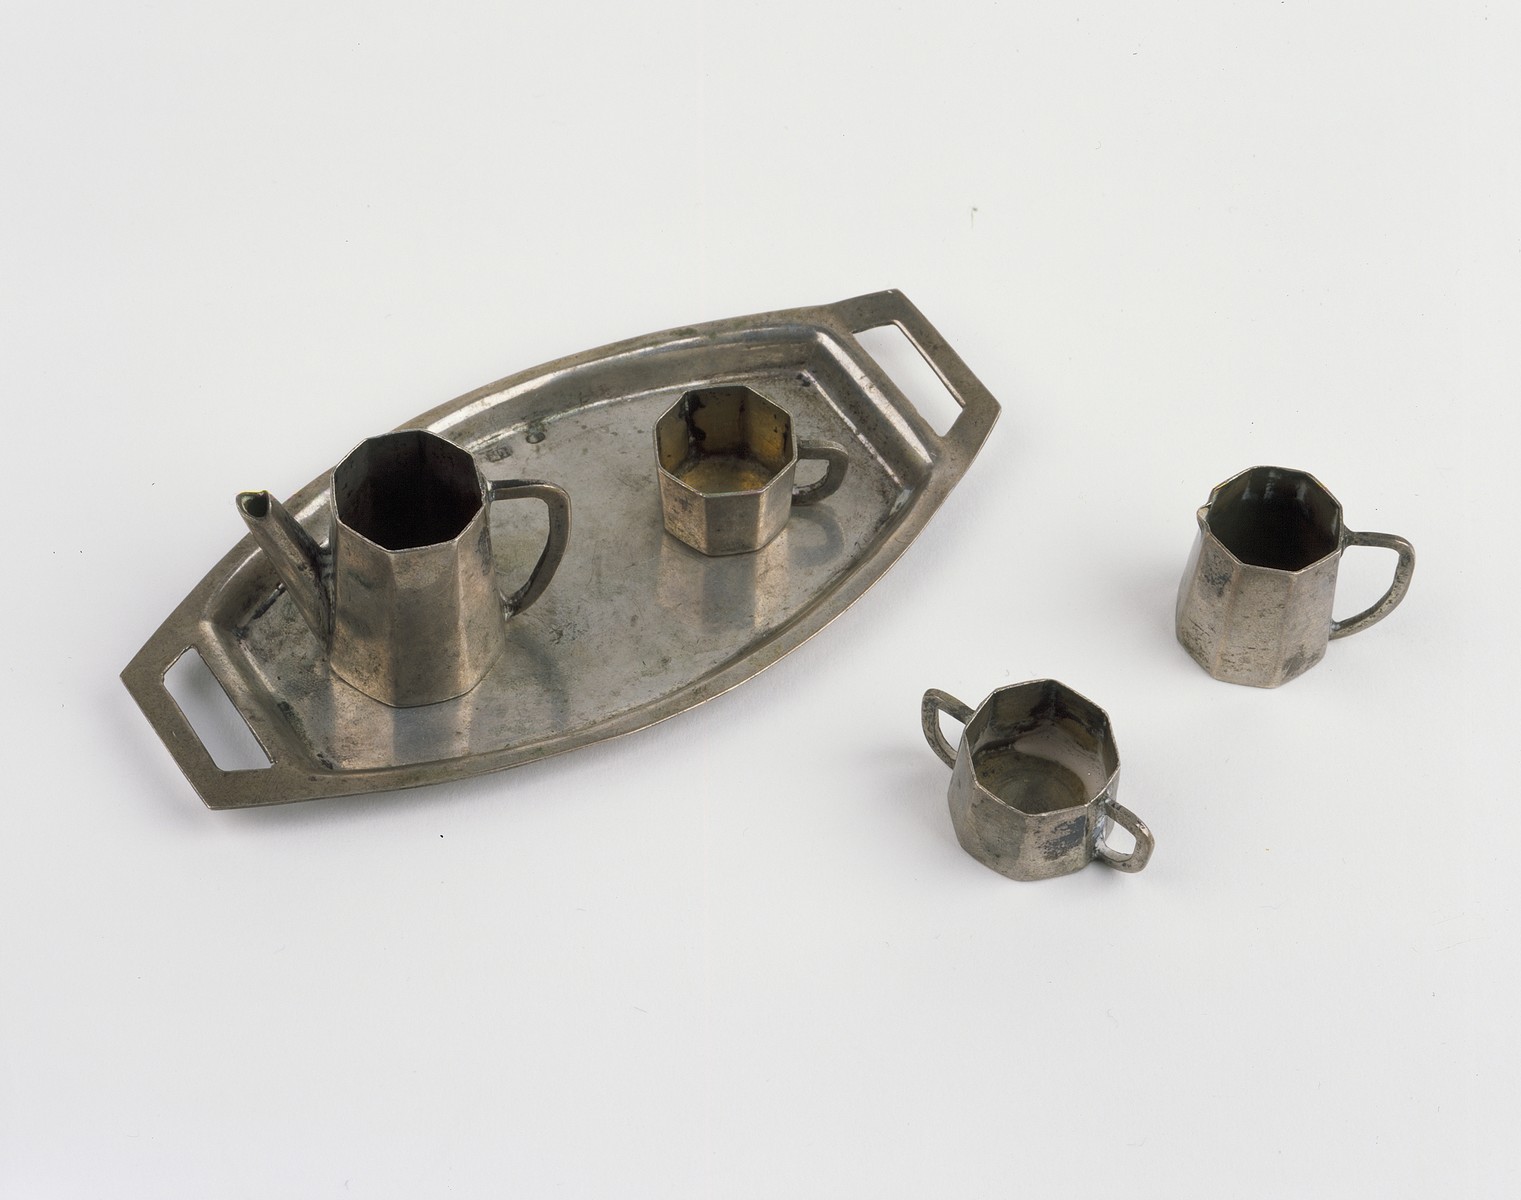 A five-piece miniature silver tea set given to Elzbieta Lusthaus by her grandmother prior to moving into the Tarnow ghetto.